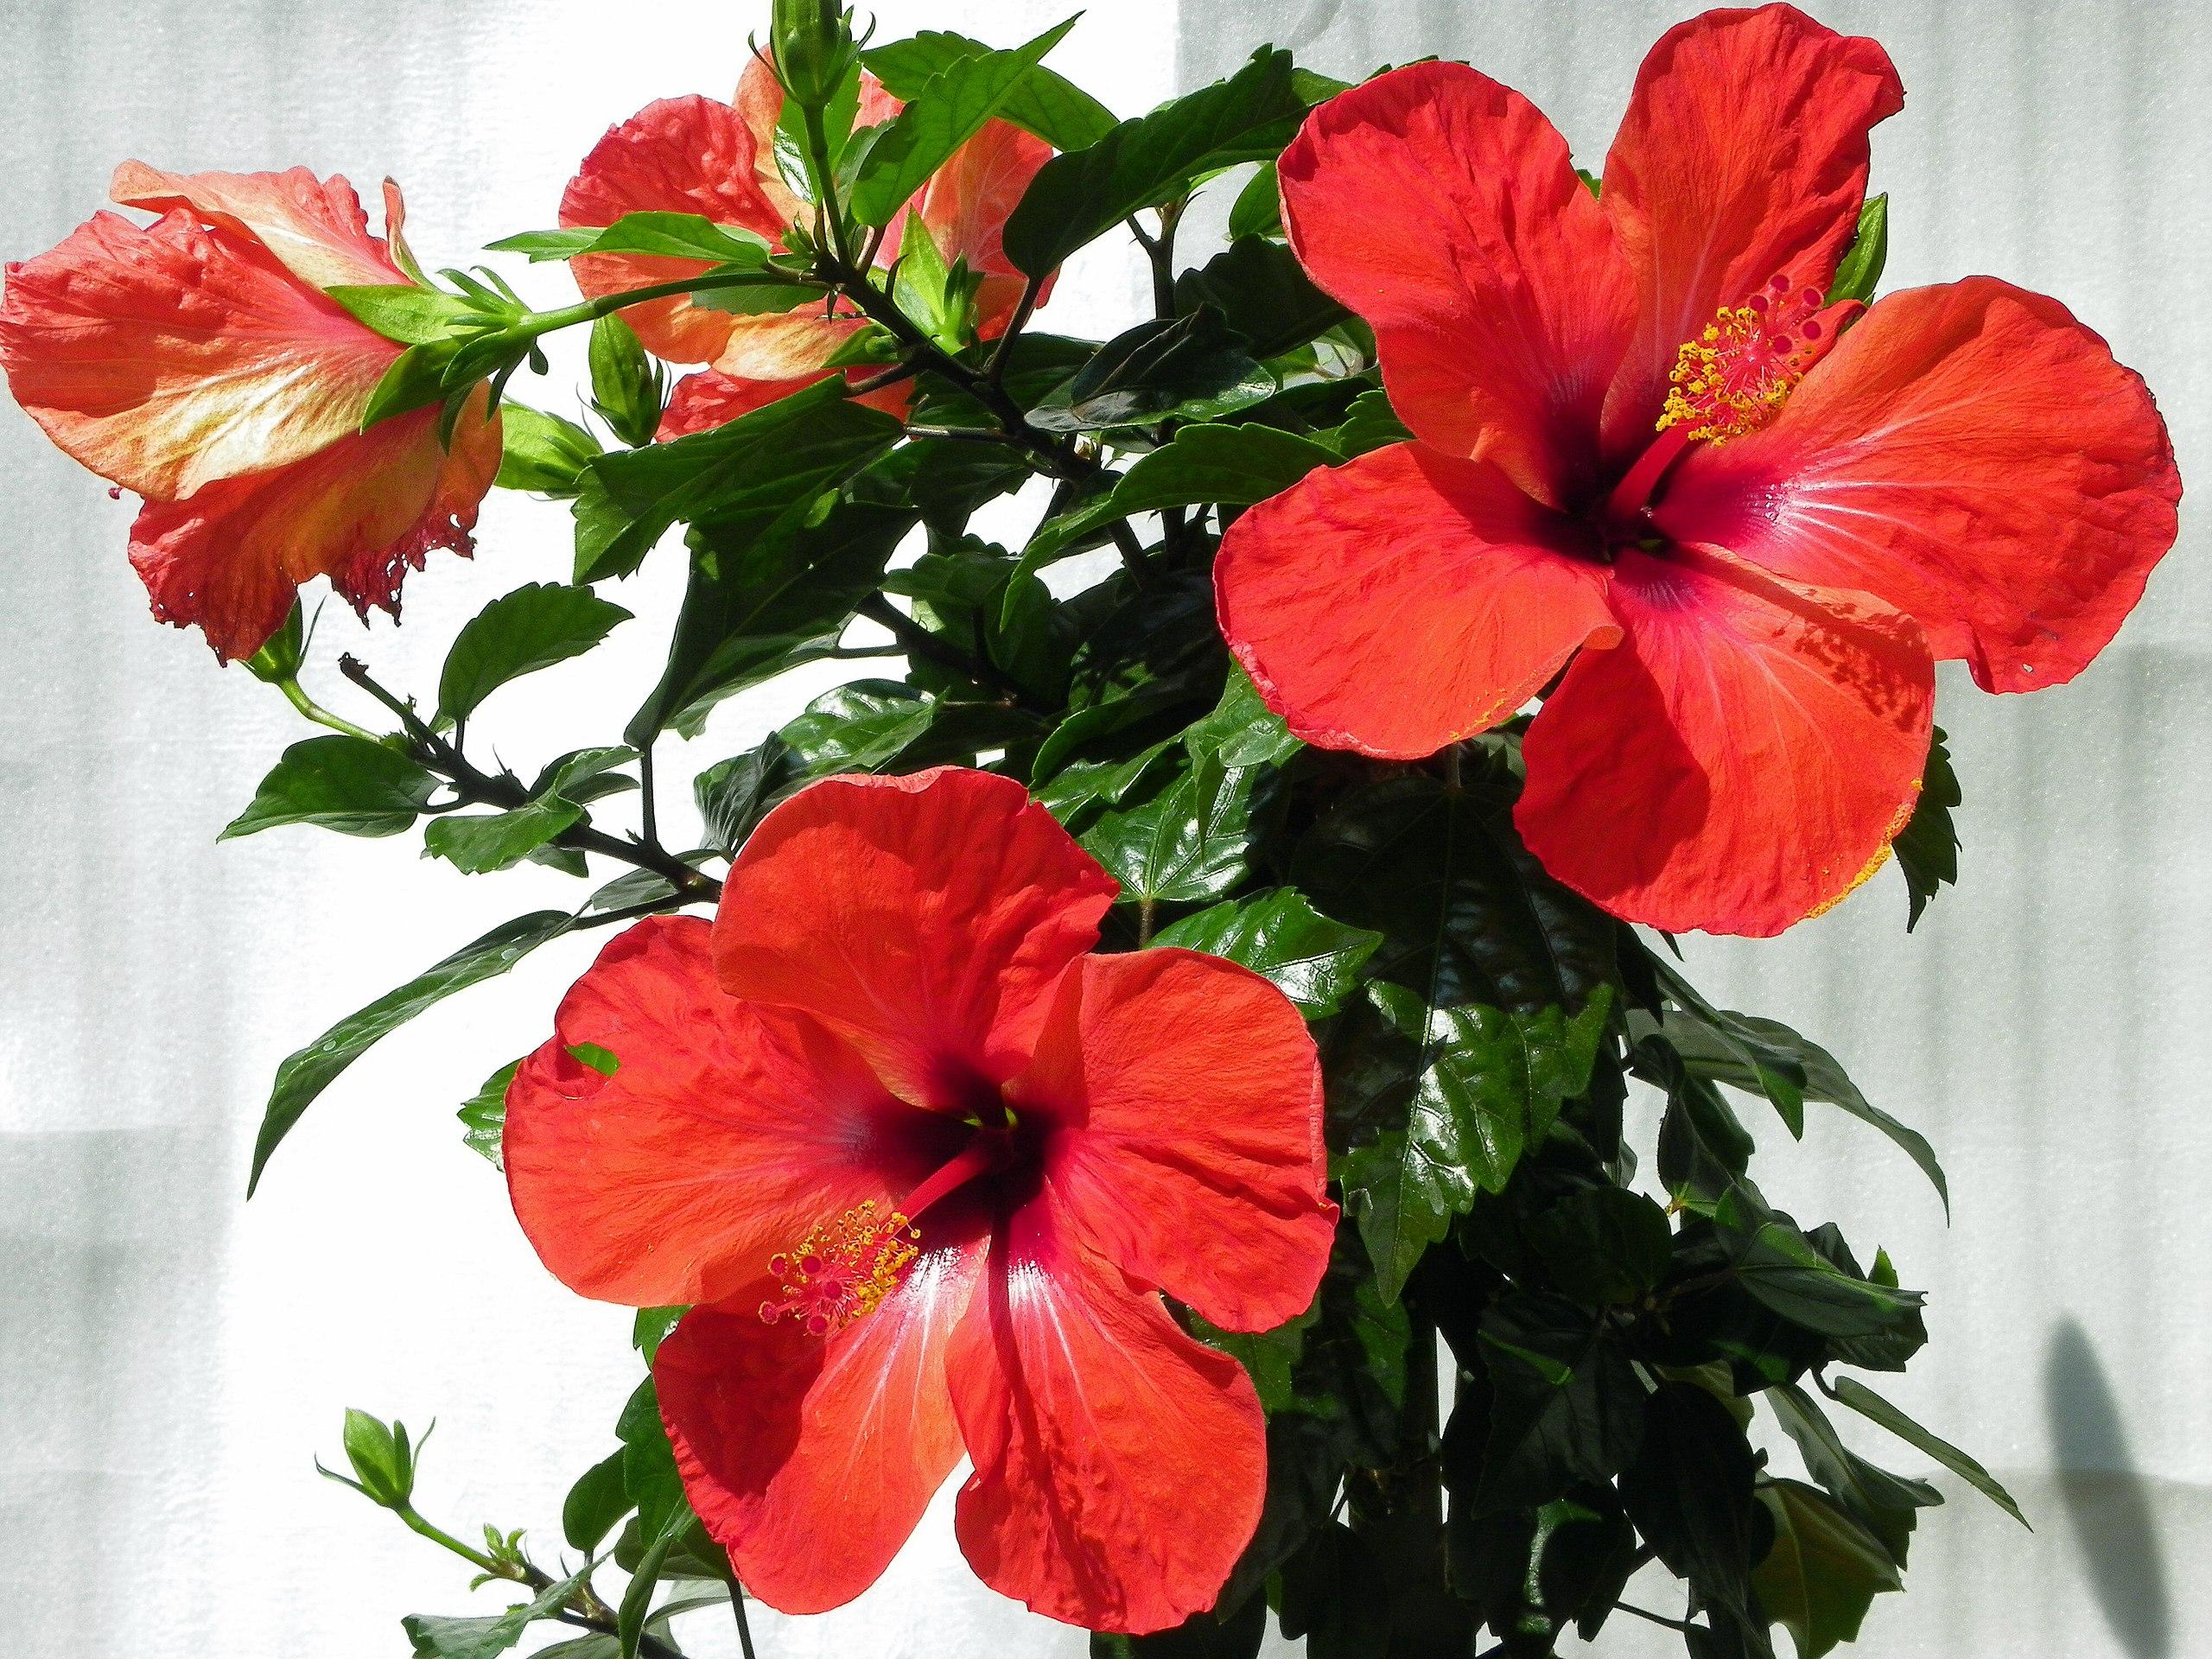 Red flower with red stigma, red style, yellow anthers, red filaments, green sepals, green buds, green leaves and stems